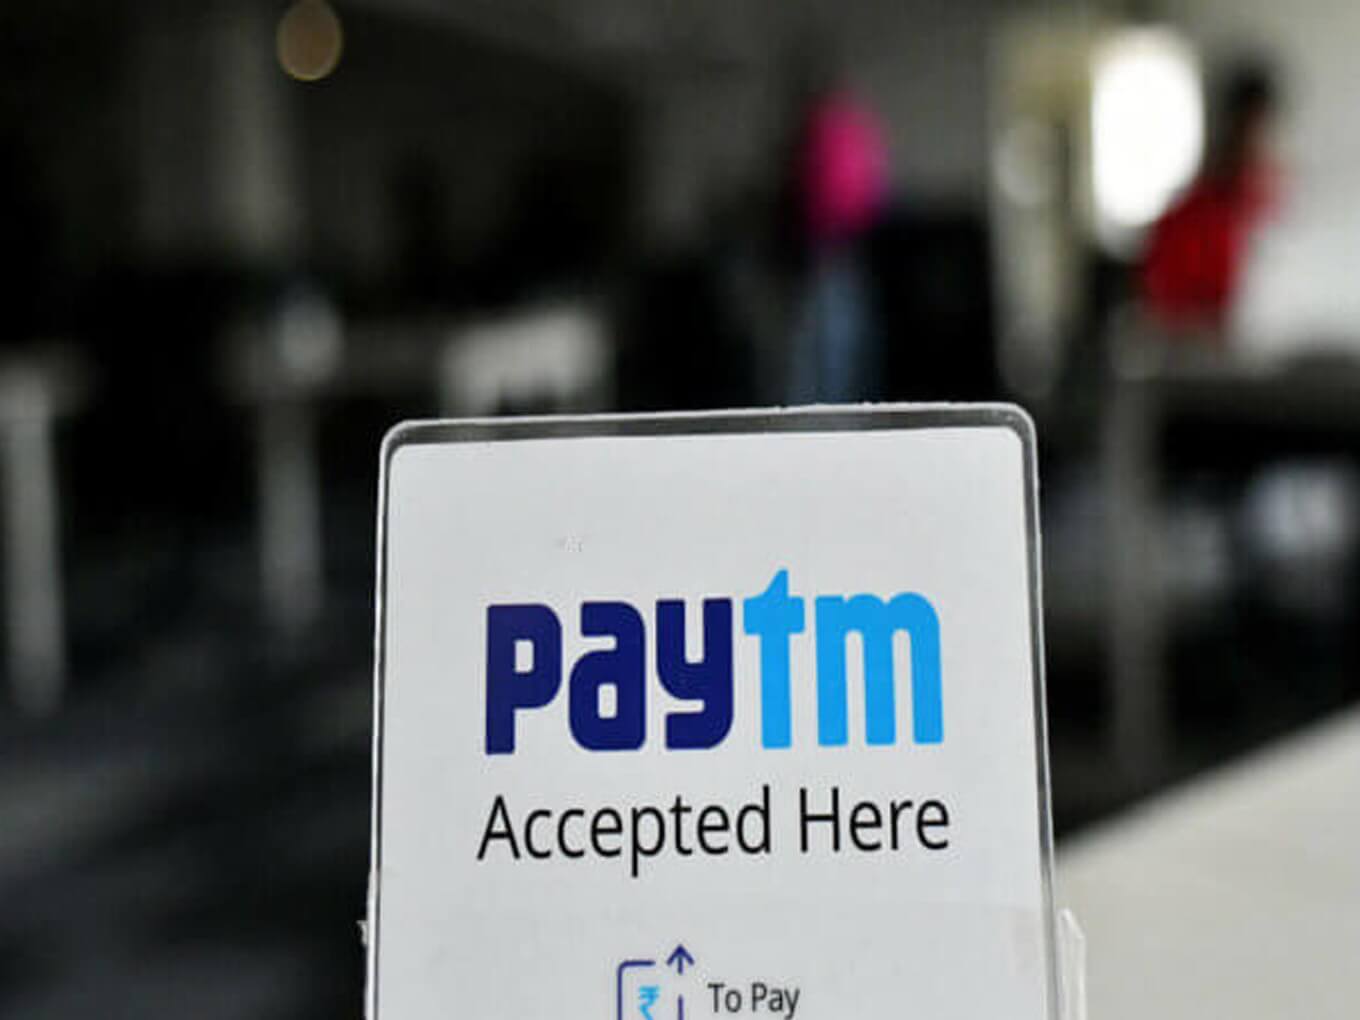 Paytm Buys 10 Acres Land To Build New Campus in Noida Expressway-Paytm Goes Global With Forex Card And Cash